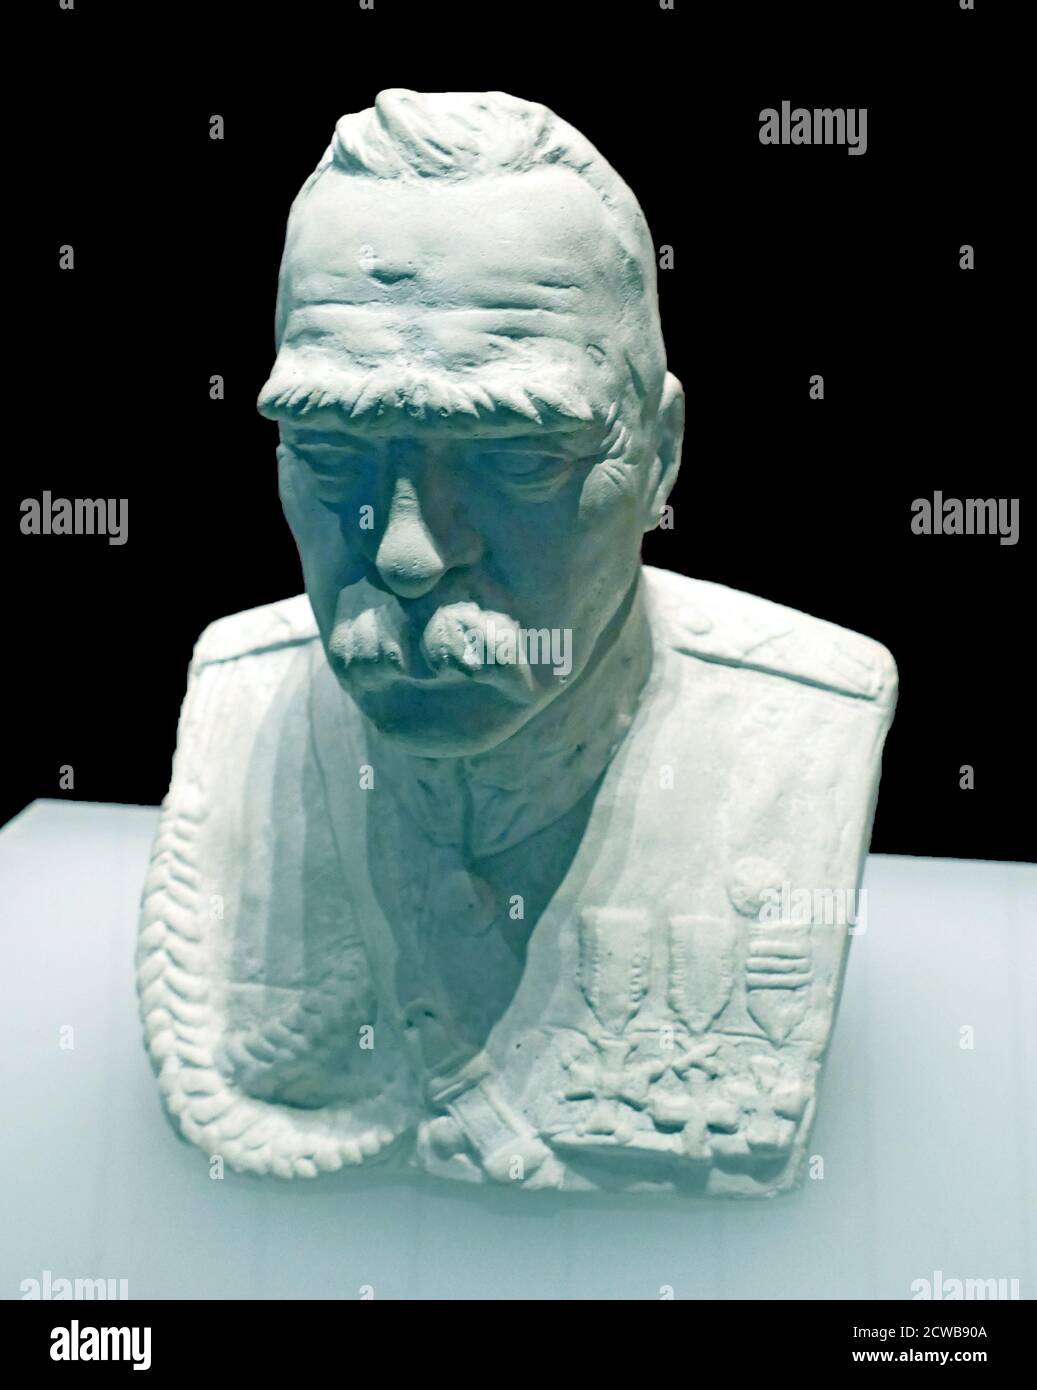 Bust of Jozef Klemens Pilsudski (1867 - 1935), Polish statesman who served as the Chief of State (1918-22) and First Marshal of Poland (from 1920). He was considered the de facto leader (1926-35) of the Second Polish Republic Stock Photo